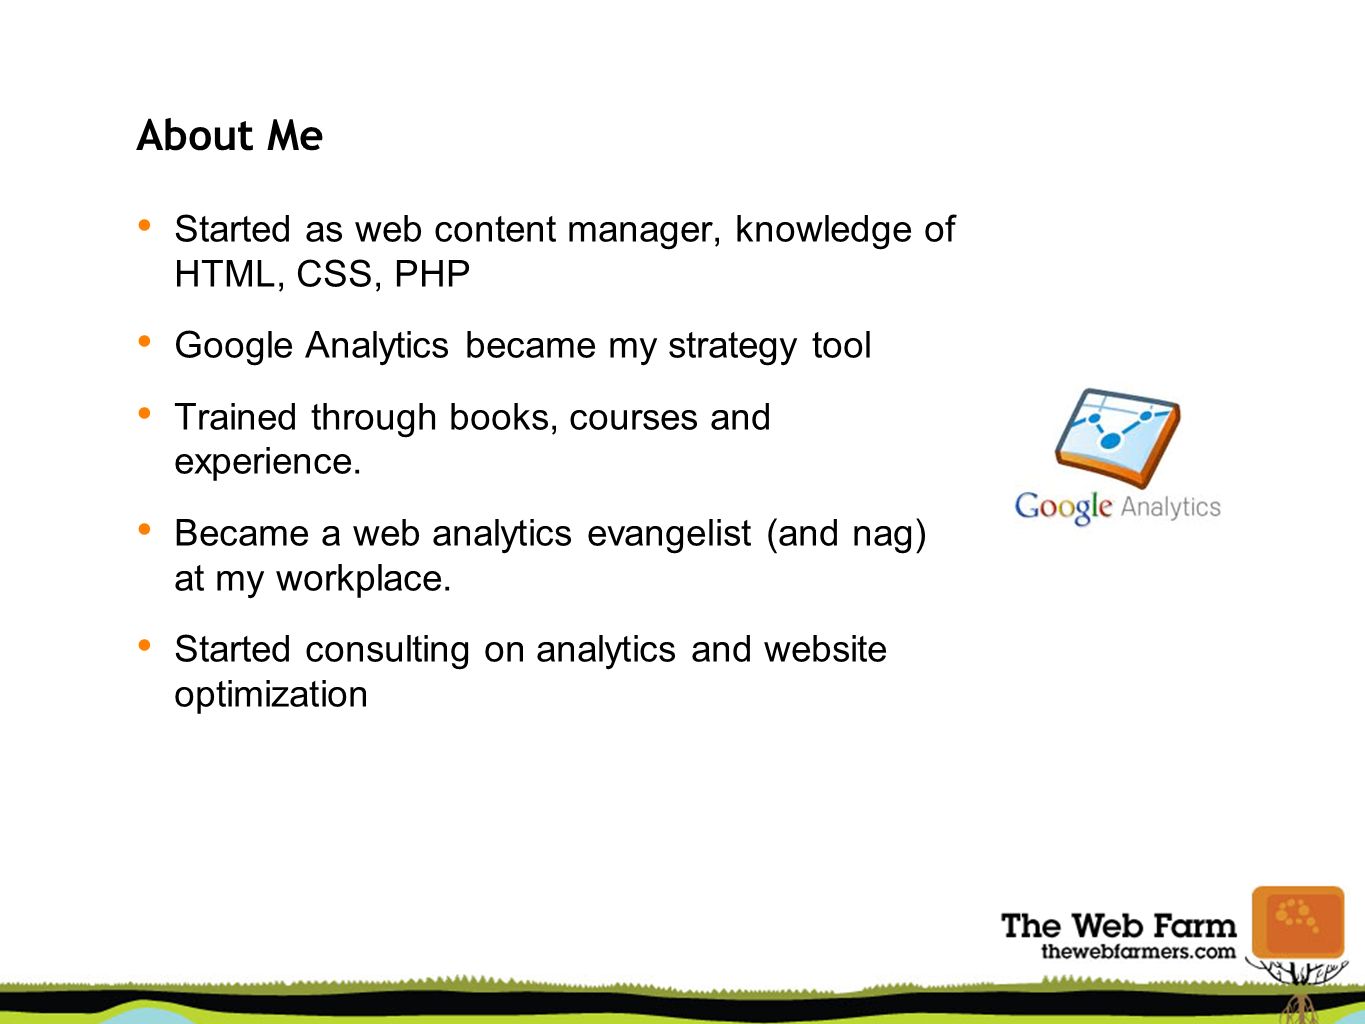 About Me Started as web content manager, knowledge of HTML, CSS, PHP Google Analytics became my strategy tool Trained through books, courses and experience.